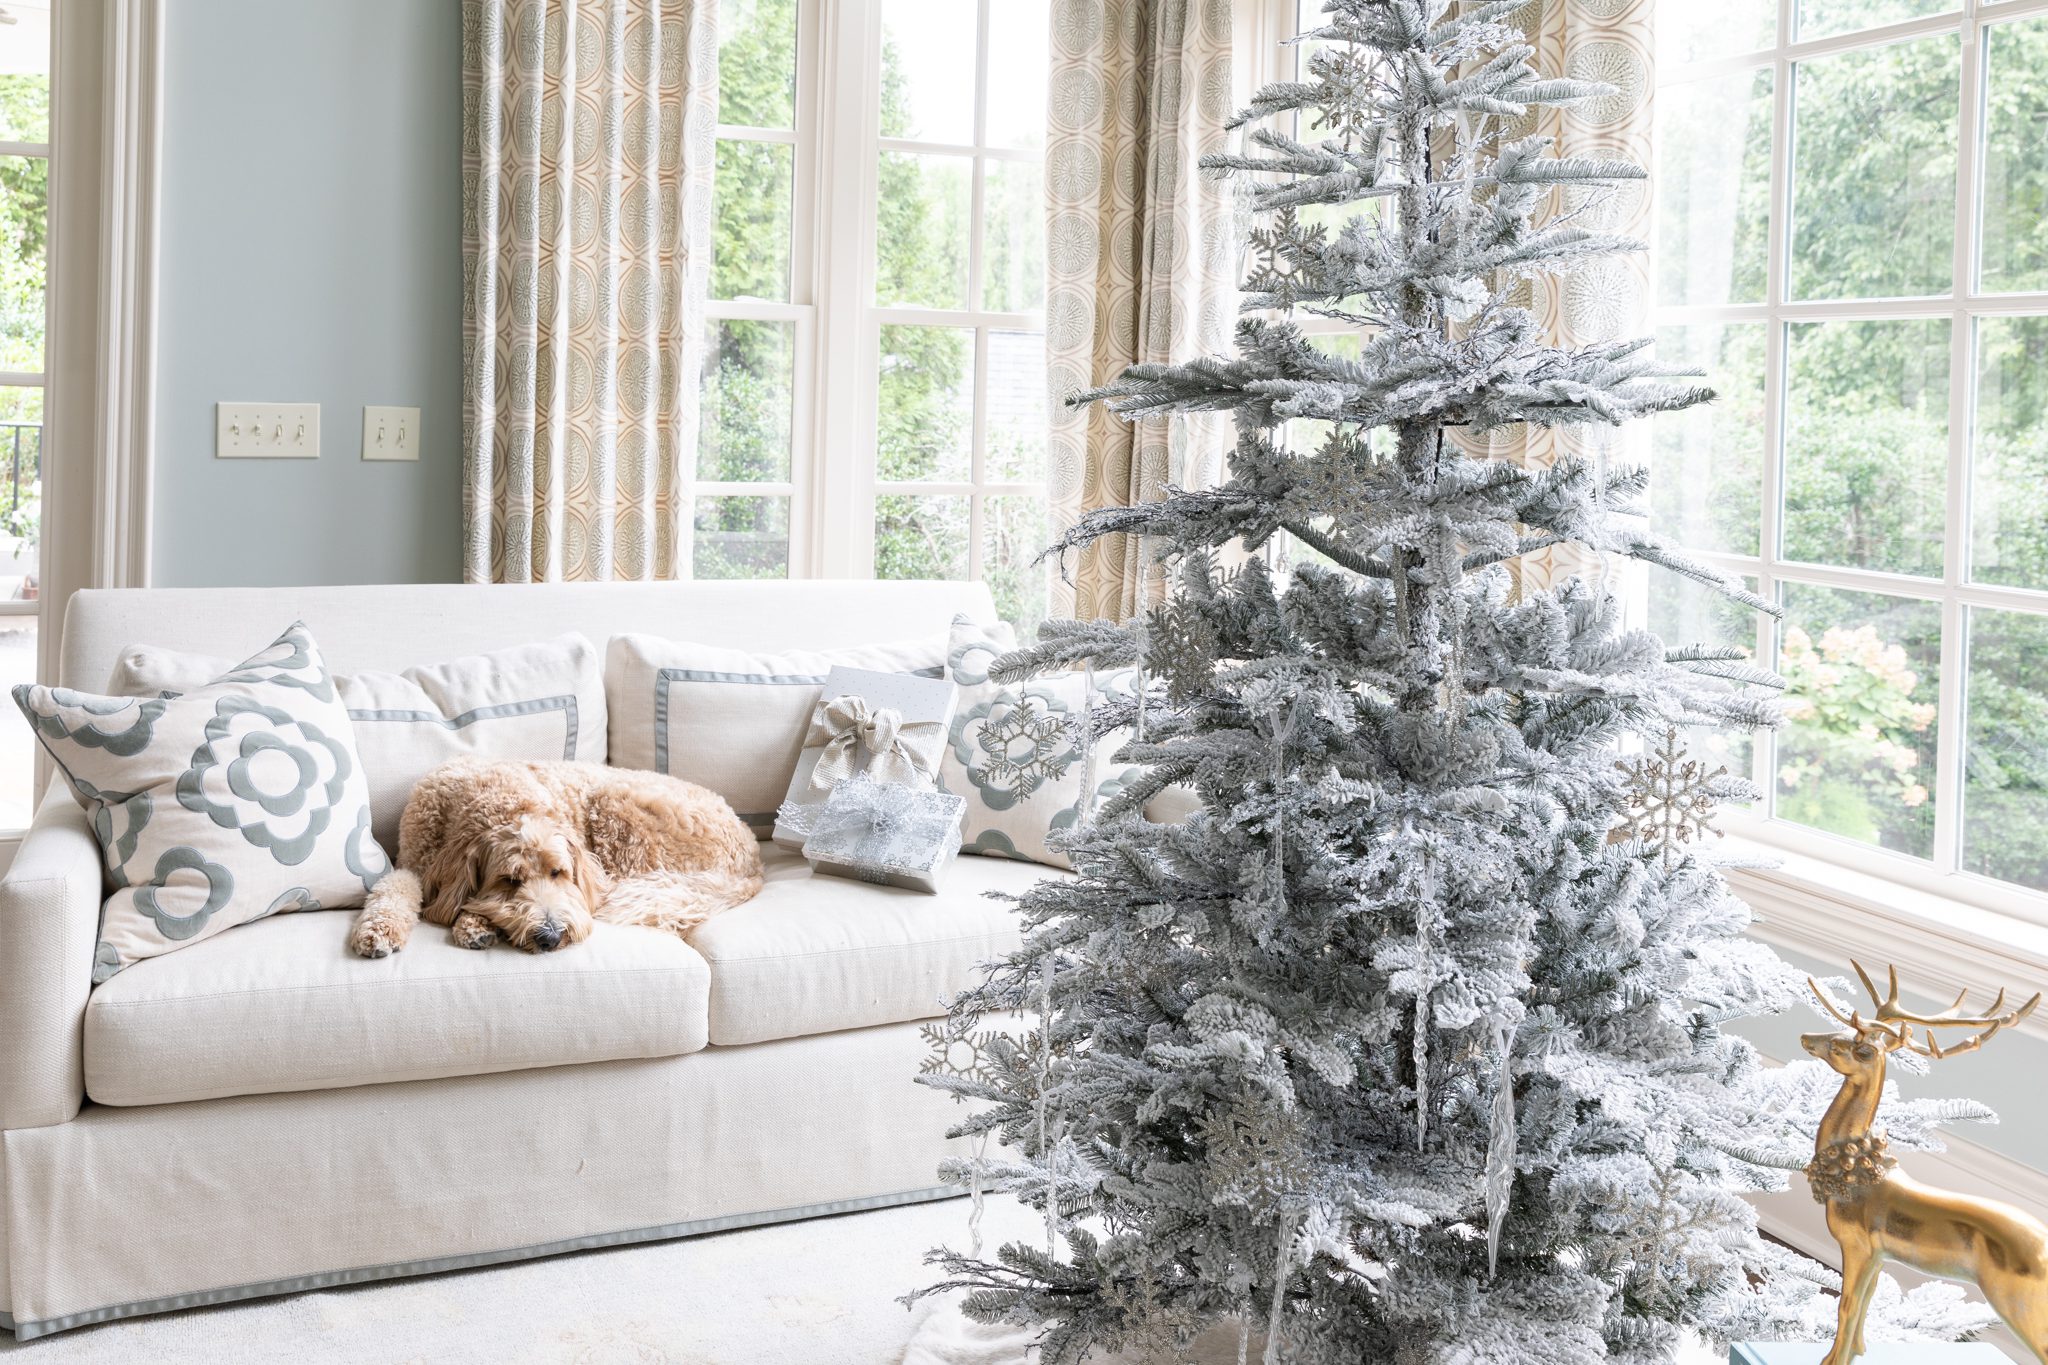 White flocked tree in a living room with a dog.